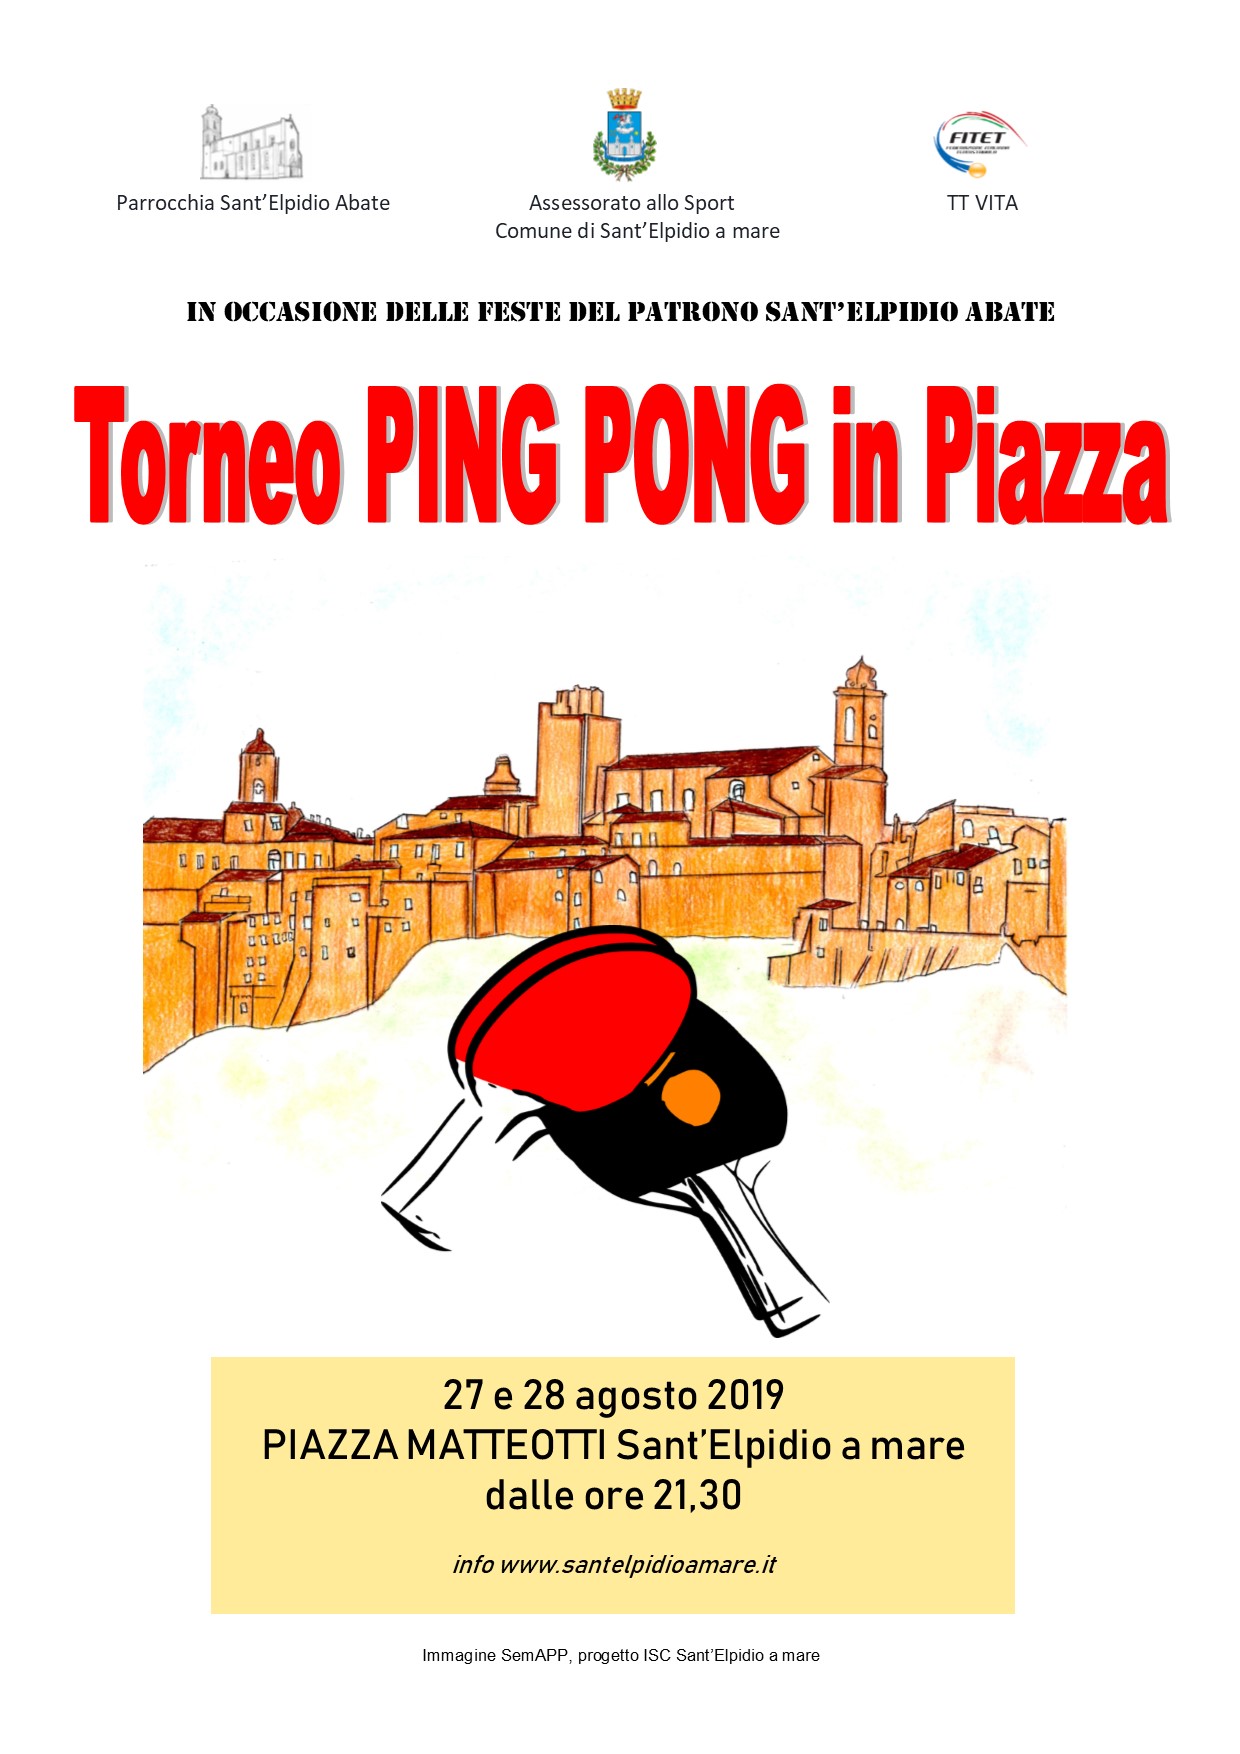 TORNEO DI PING PONG IN PIAZZA